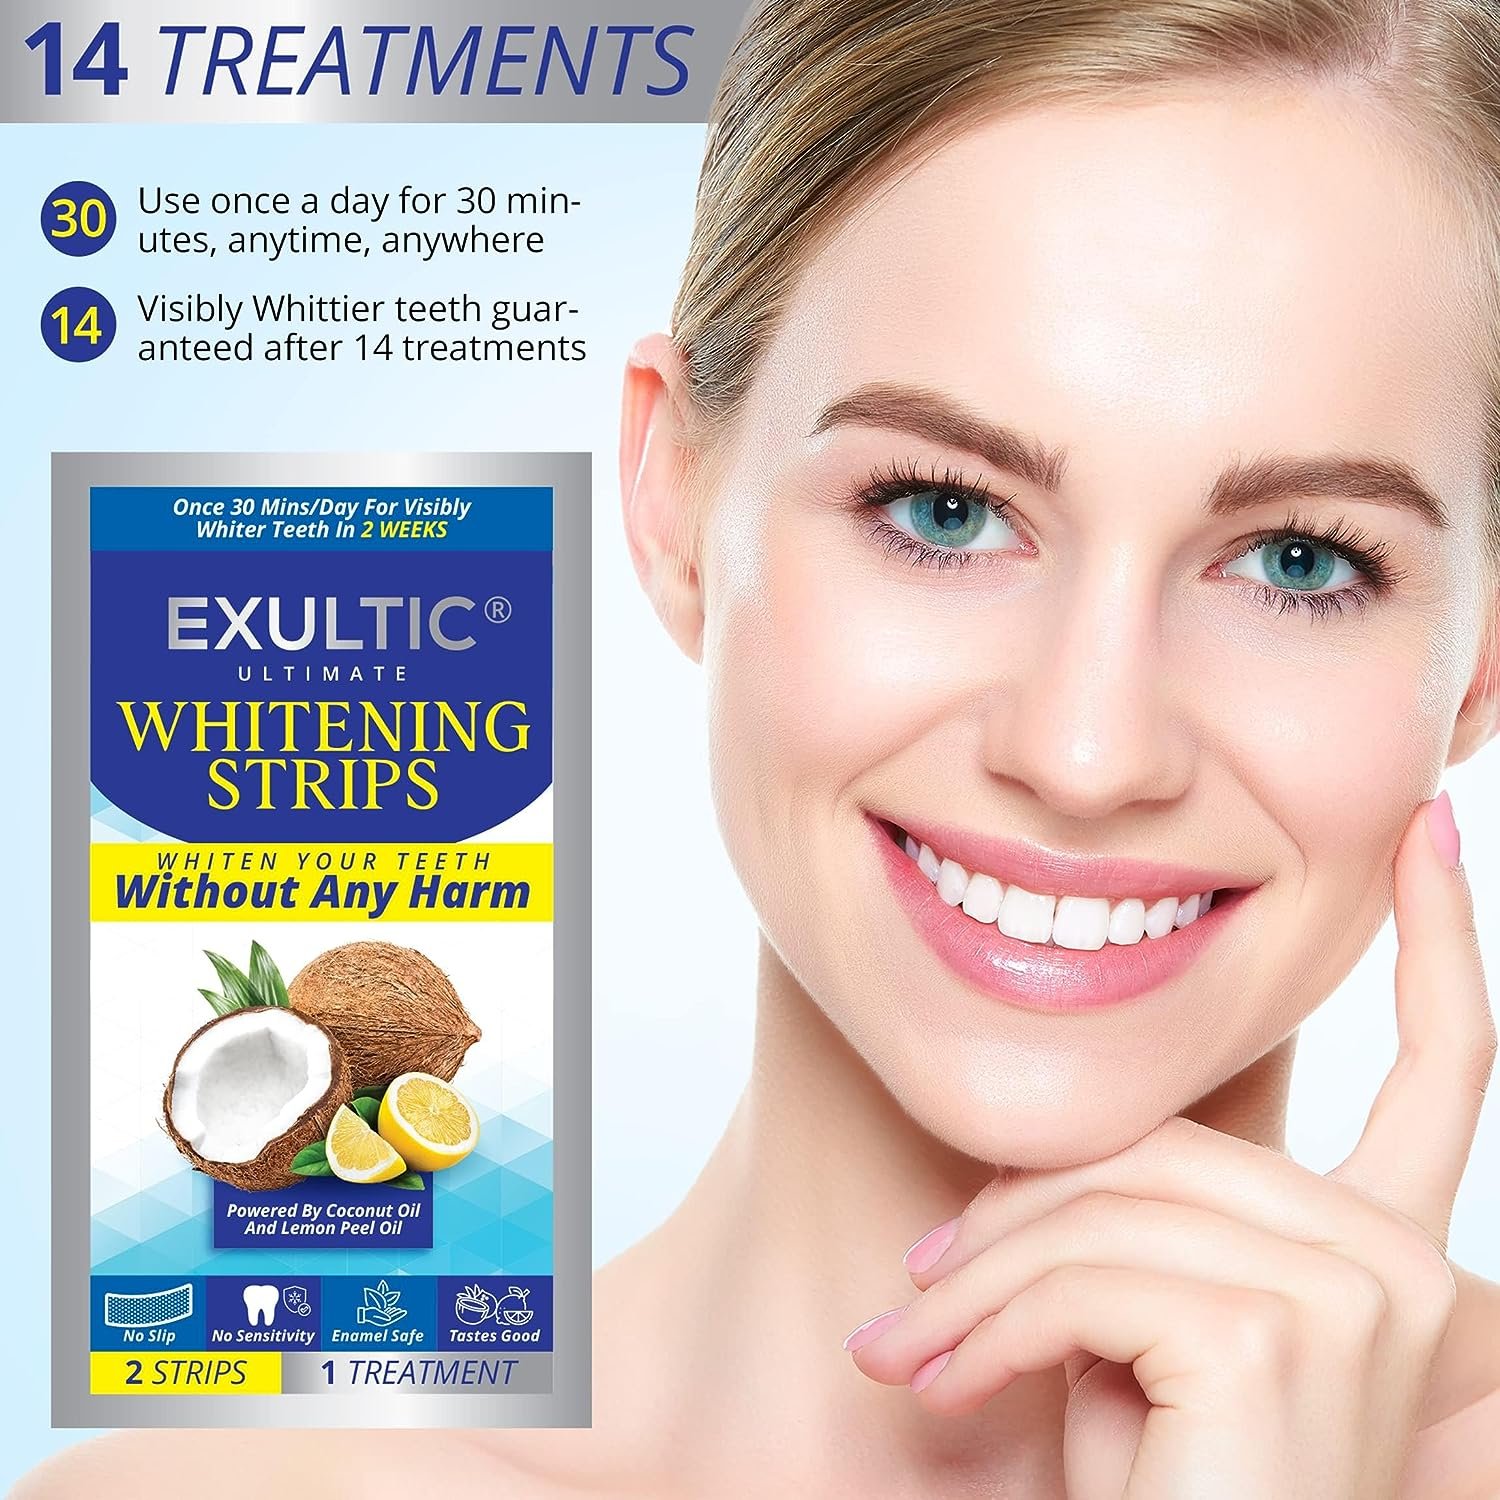 Teeth Whitening Strips for Sensitive Teeth - Coconut and Lemon Peel Oil Infused - Whiter, Brighter Smiles - Gentle and Safe Whitening Kit -28 Whitening Strips -14 Treatments